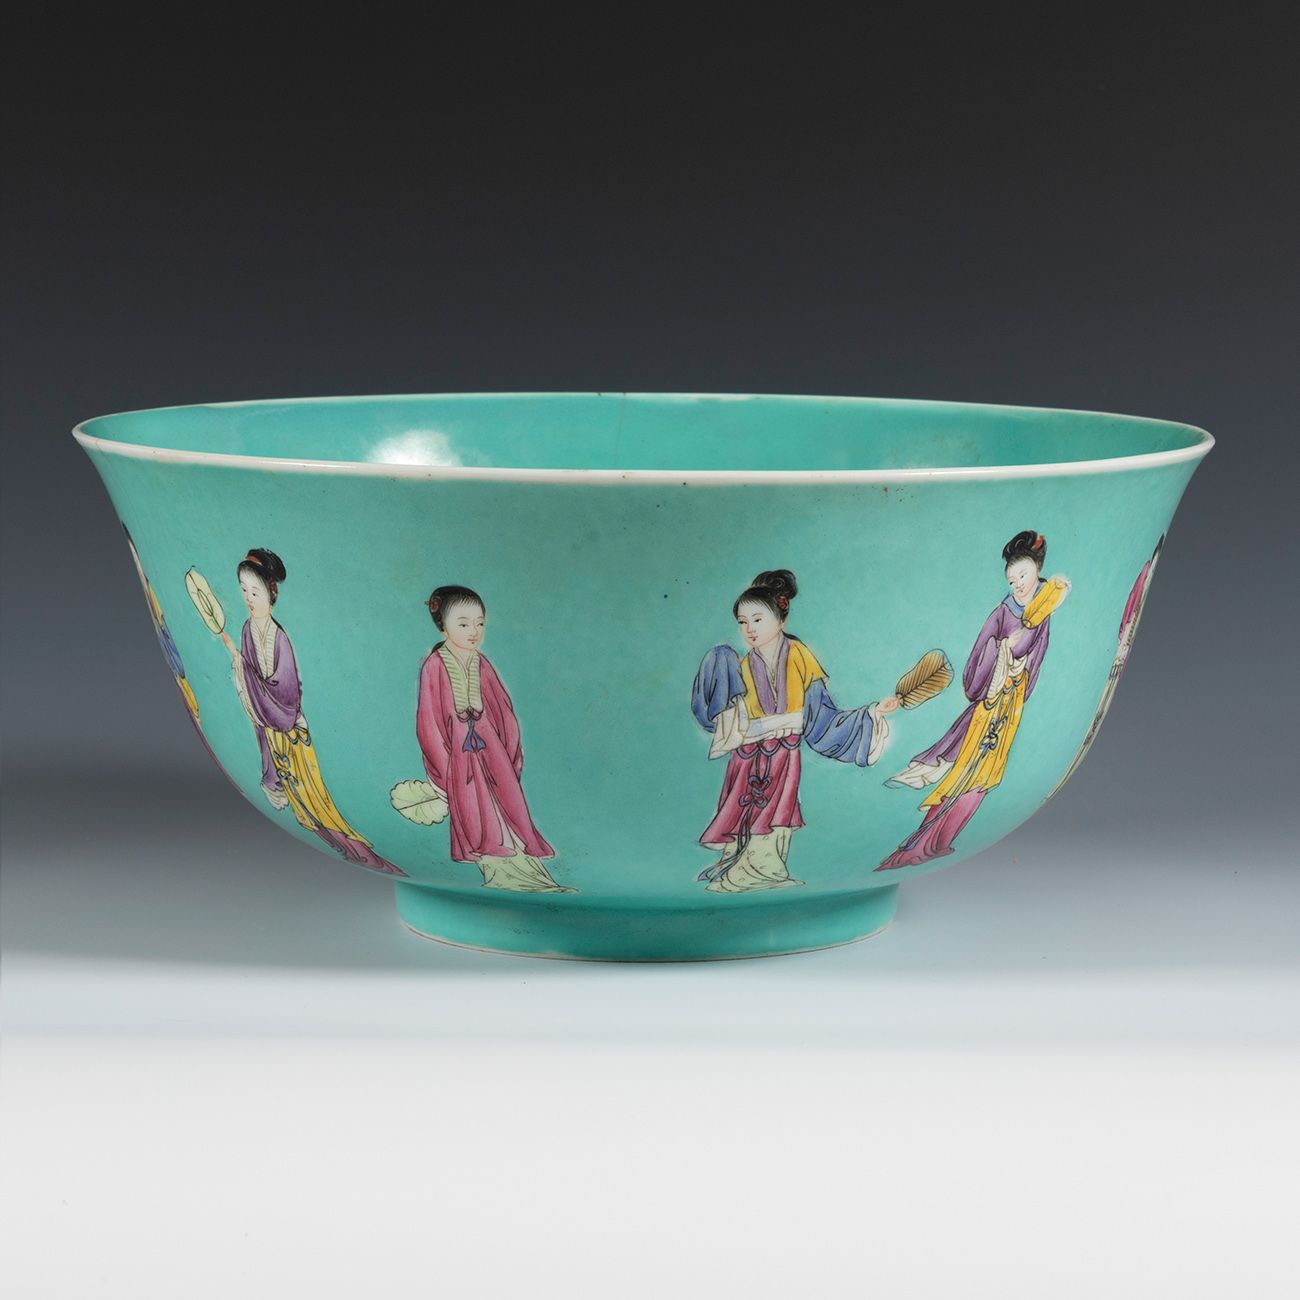 Null Quianlong period bowl, ca. 1750, East India Company.
Glazed porcelain.
With&hellip;